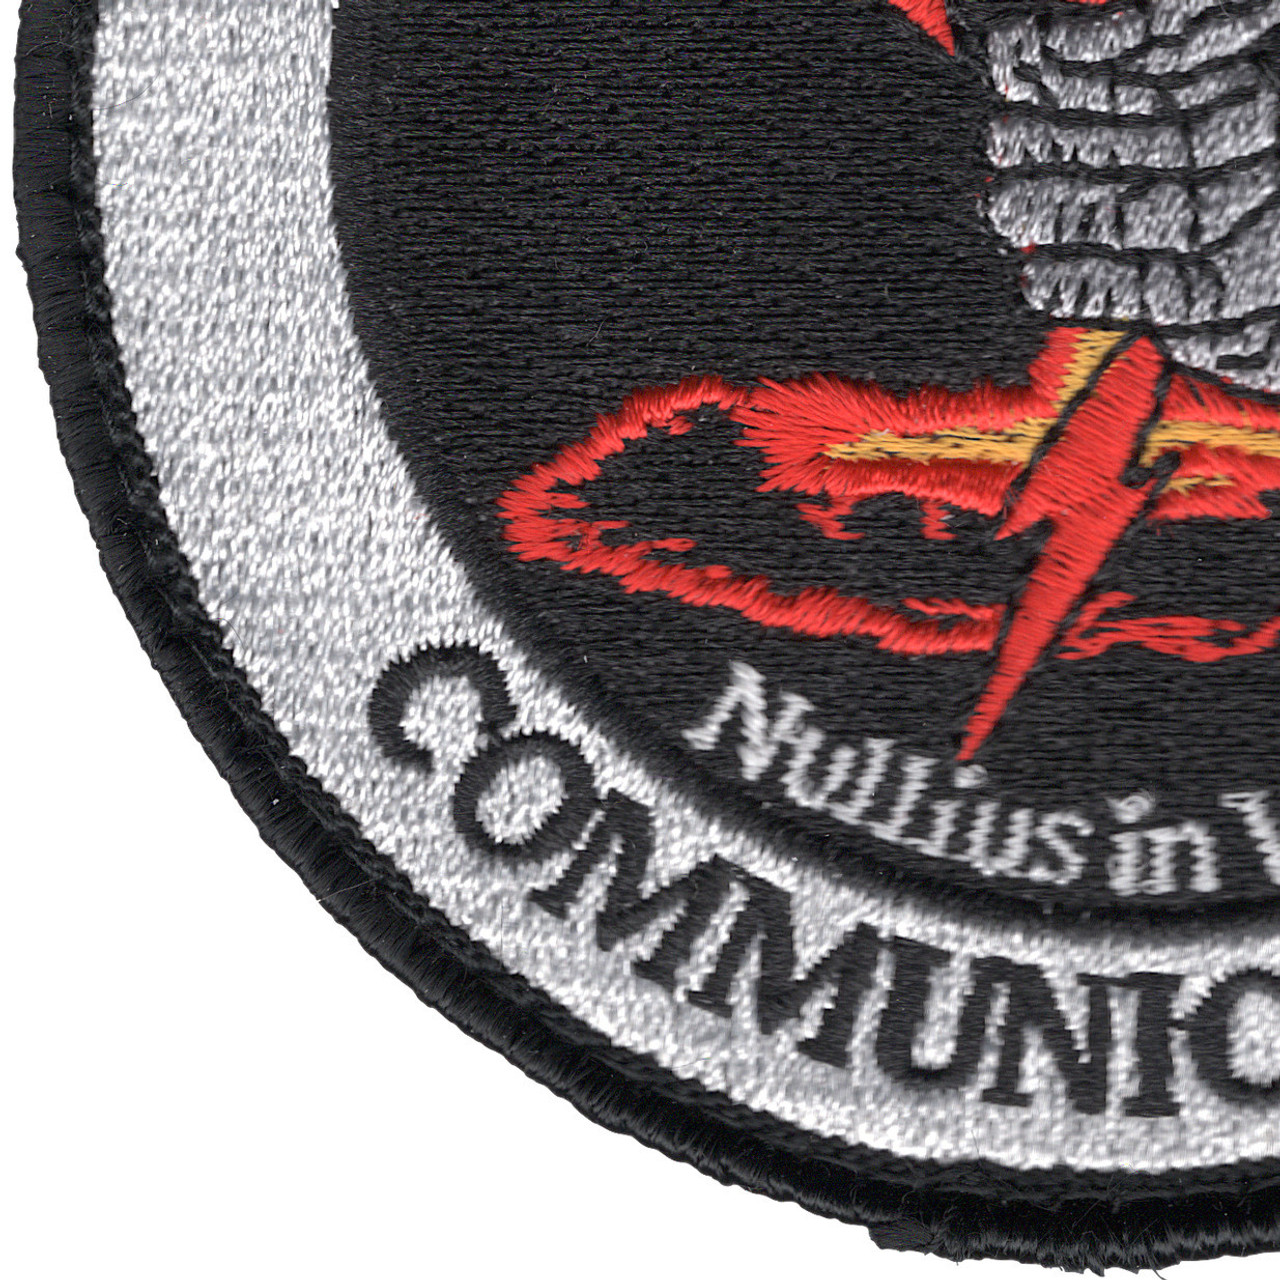 MCAS Futenma Aircraft Recovery Patch - No Hook and Loop